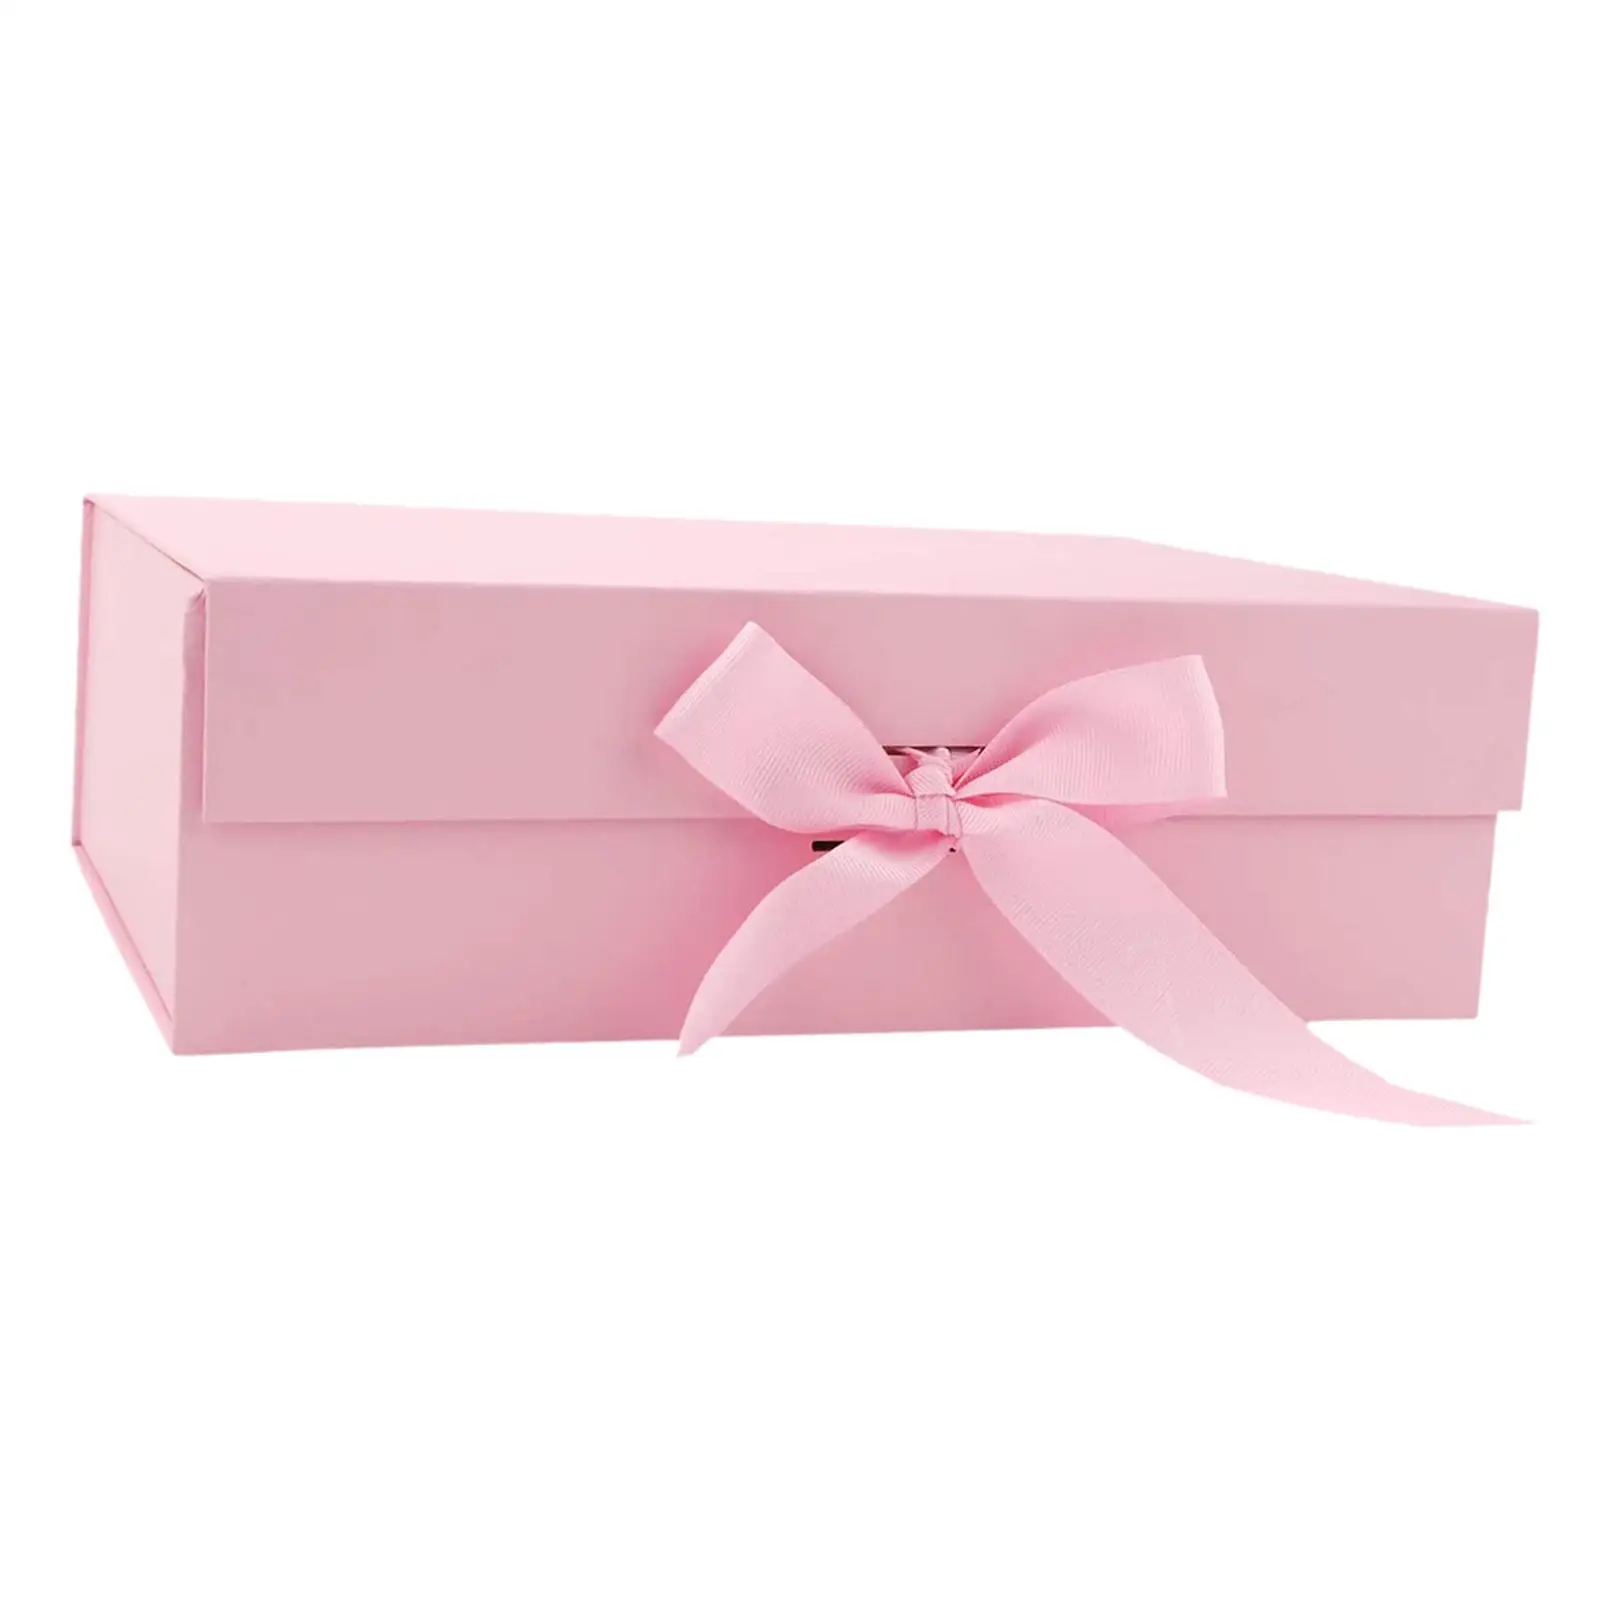 Gift Box with Ribbon Decorative Box Reusable Easy Assemble Large Storage Box for Birthday Party Engagement Party Bridemaid Gifts